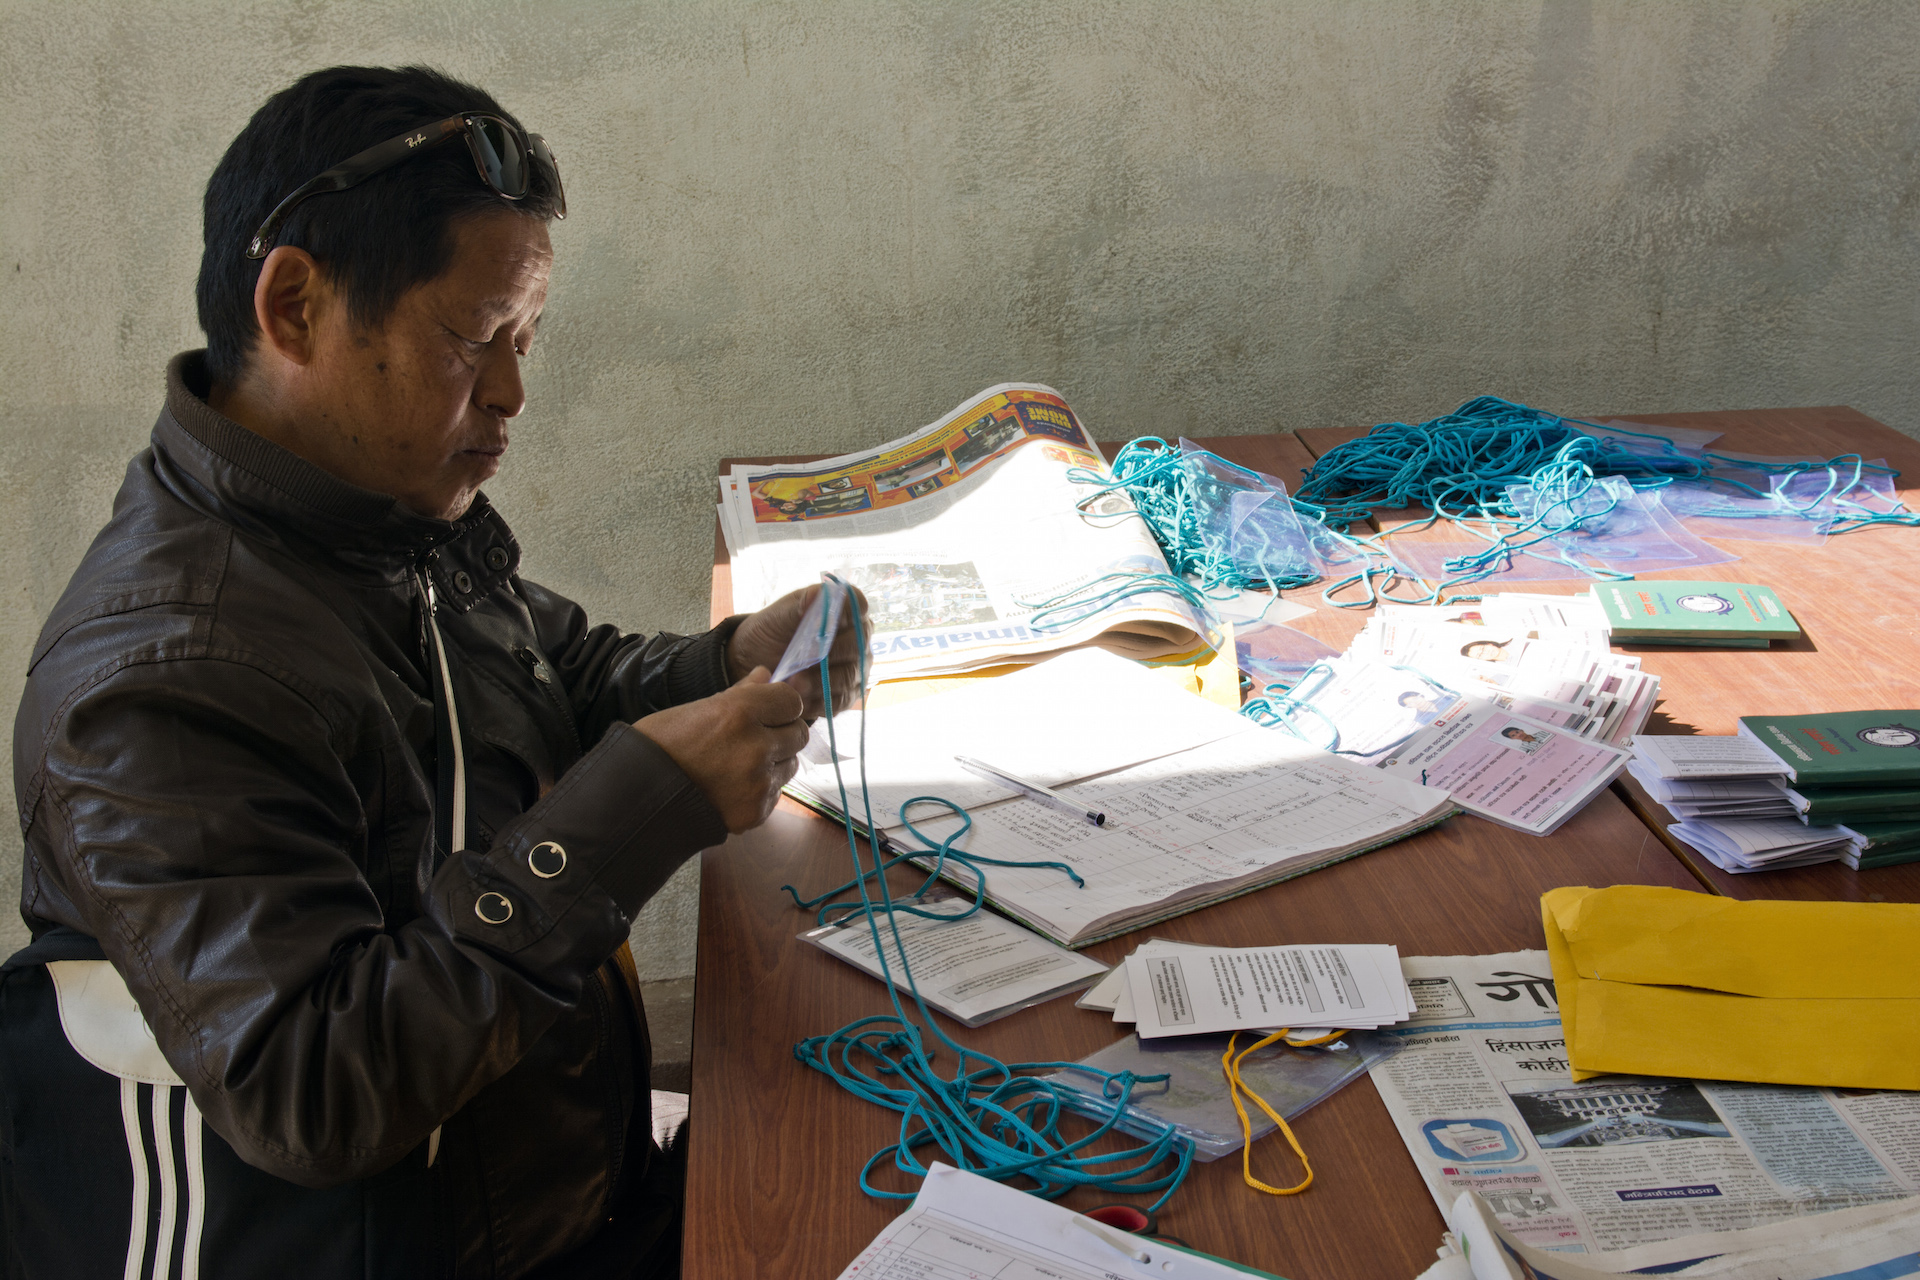 At the National Election Observation Committee, a domestic election observation organization based in Kathmandu, a worker hands out observer credentials.